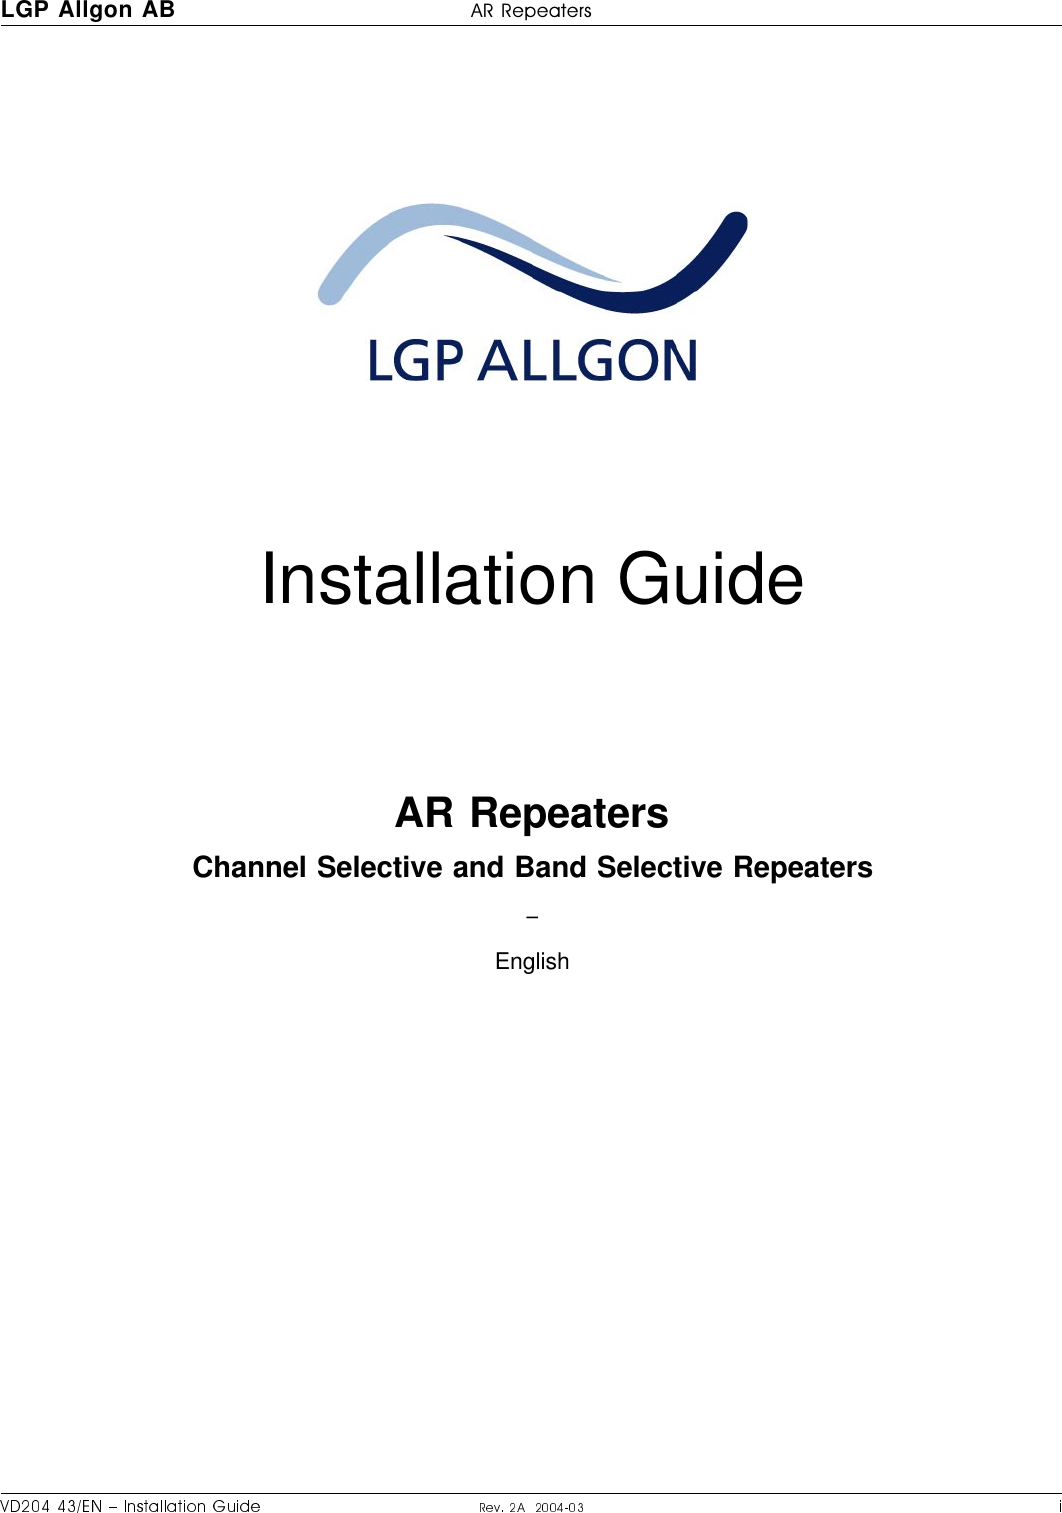 Installation GuideAR RepeatersChannel Selective and Band Selective Repeaters–EnglishLGP Allgon AB H|H#H